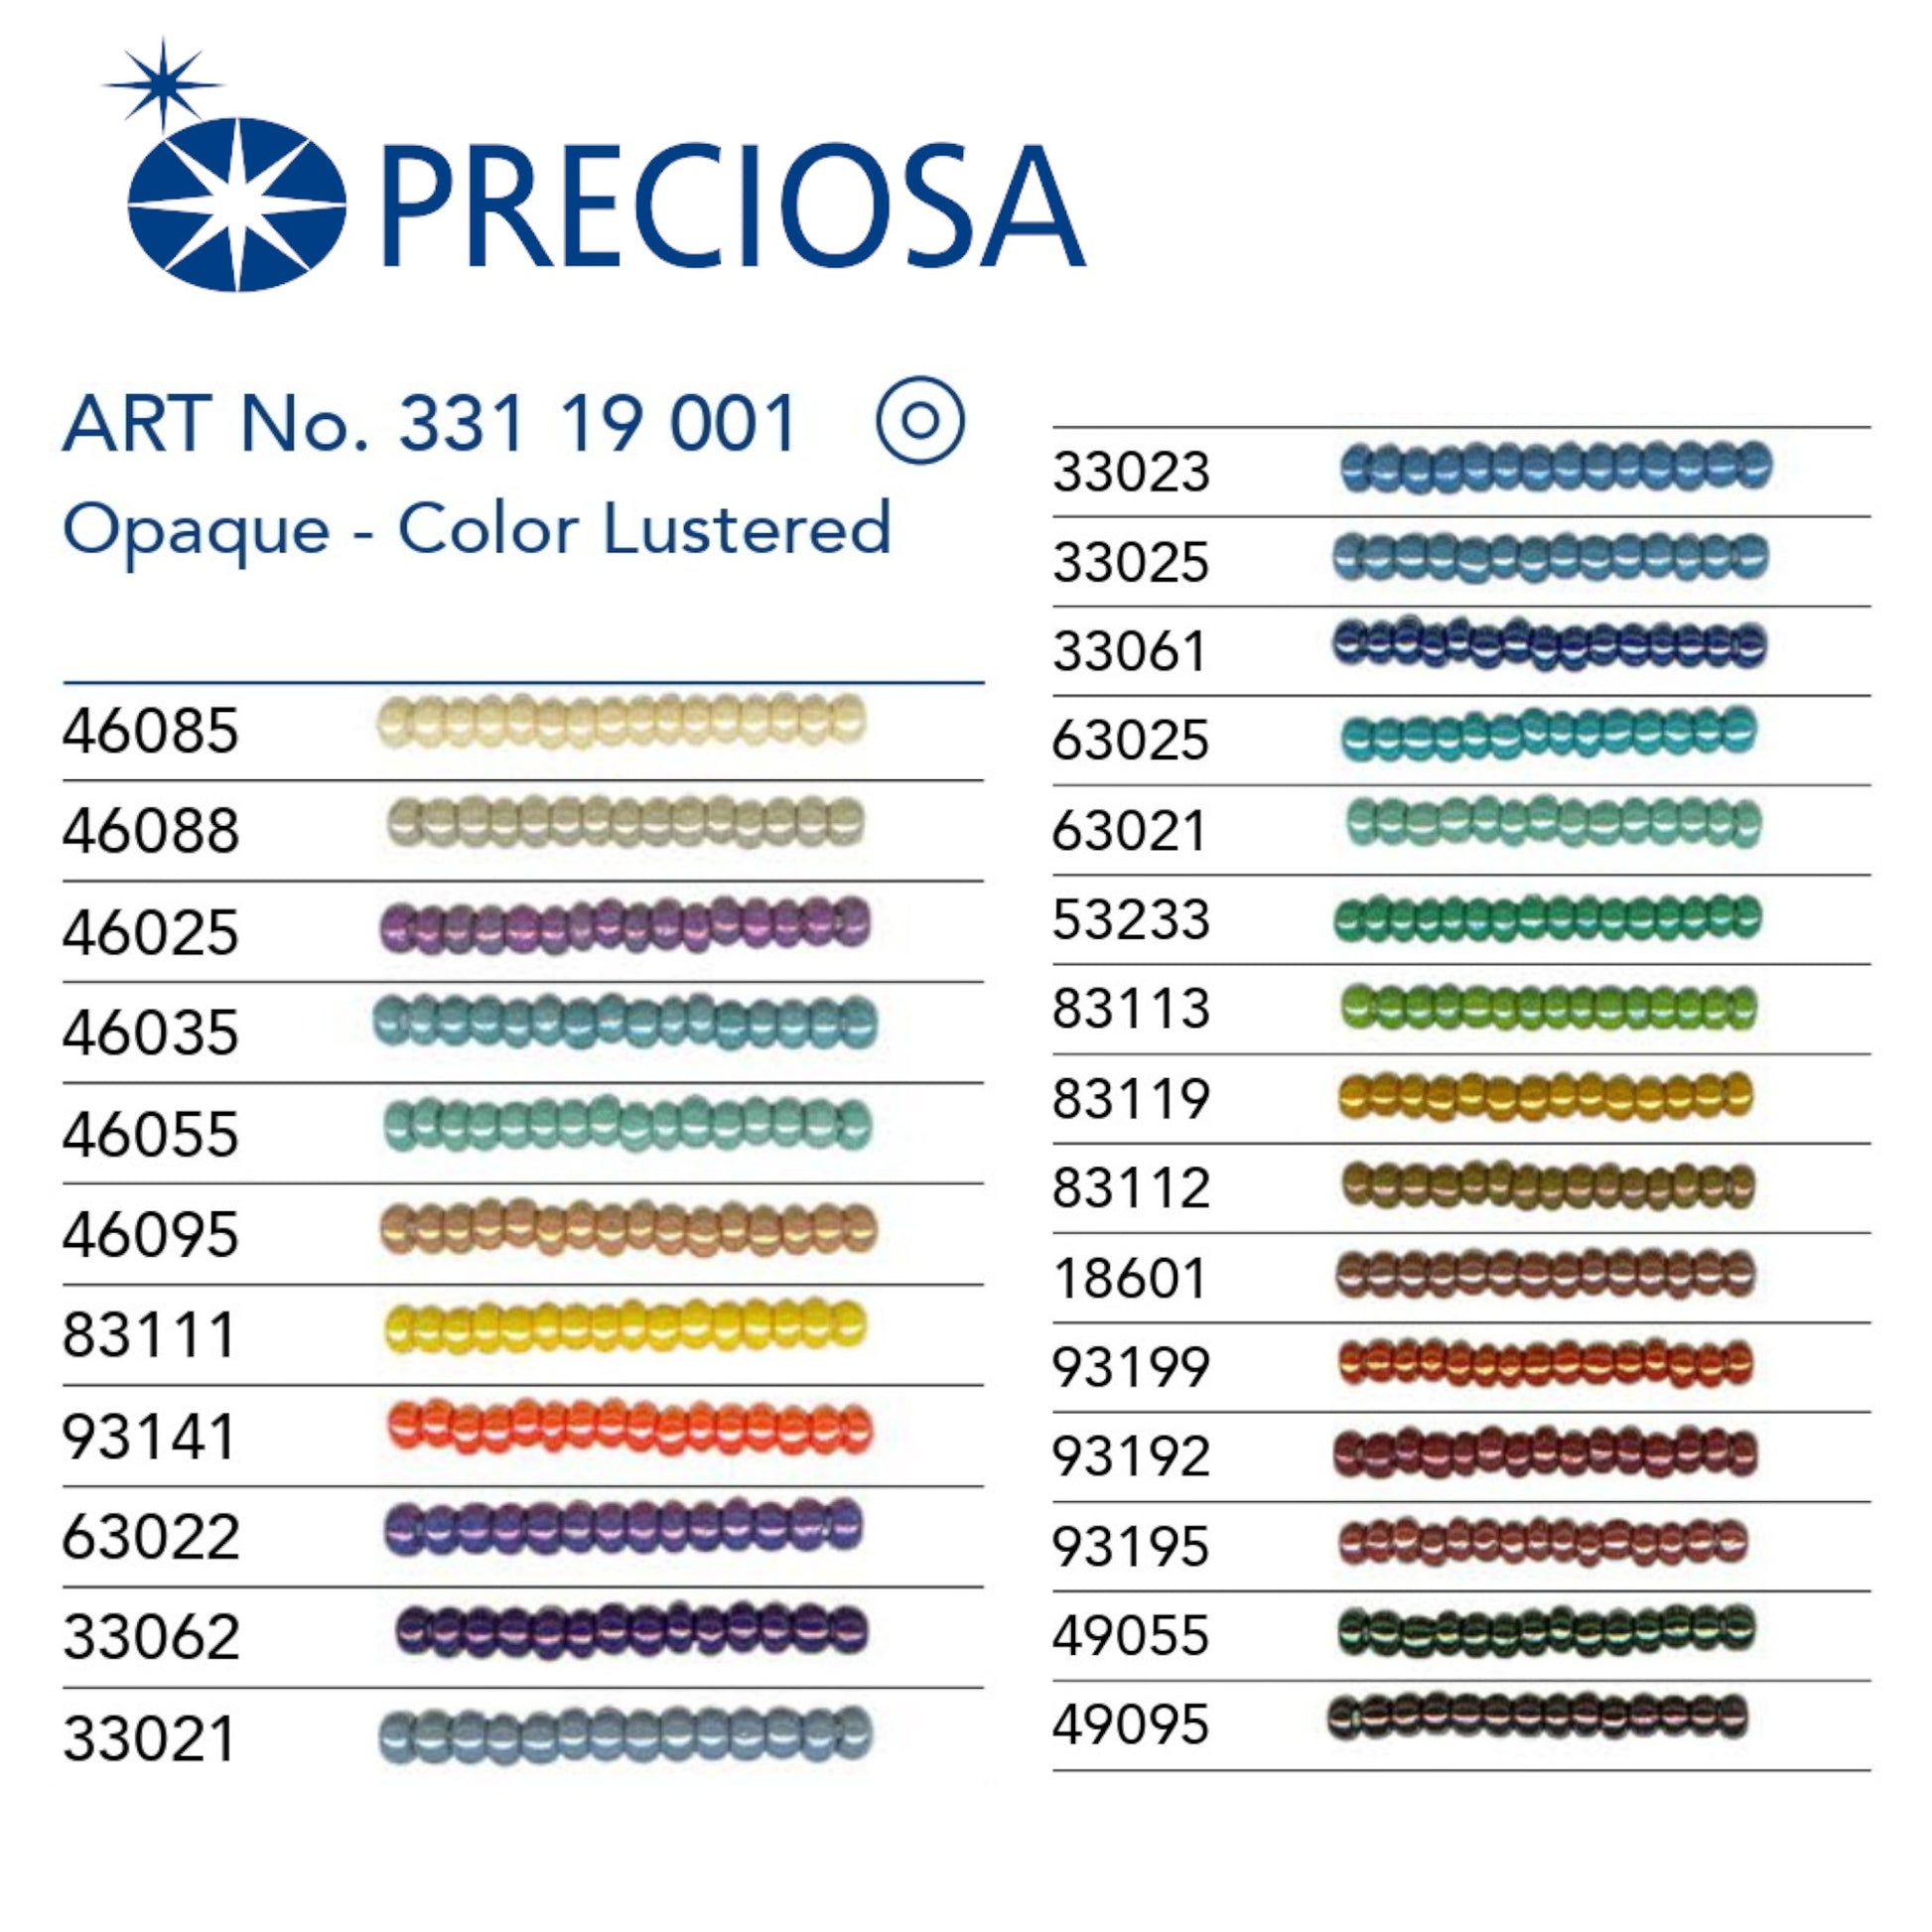 93141 Czech Seed Beads Preciosa Rocailes Opaque - Color Lustered - VadymShop